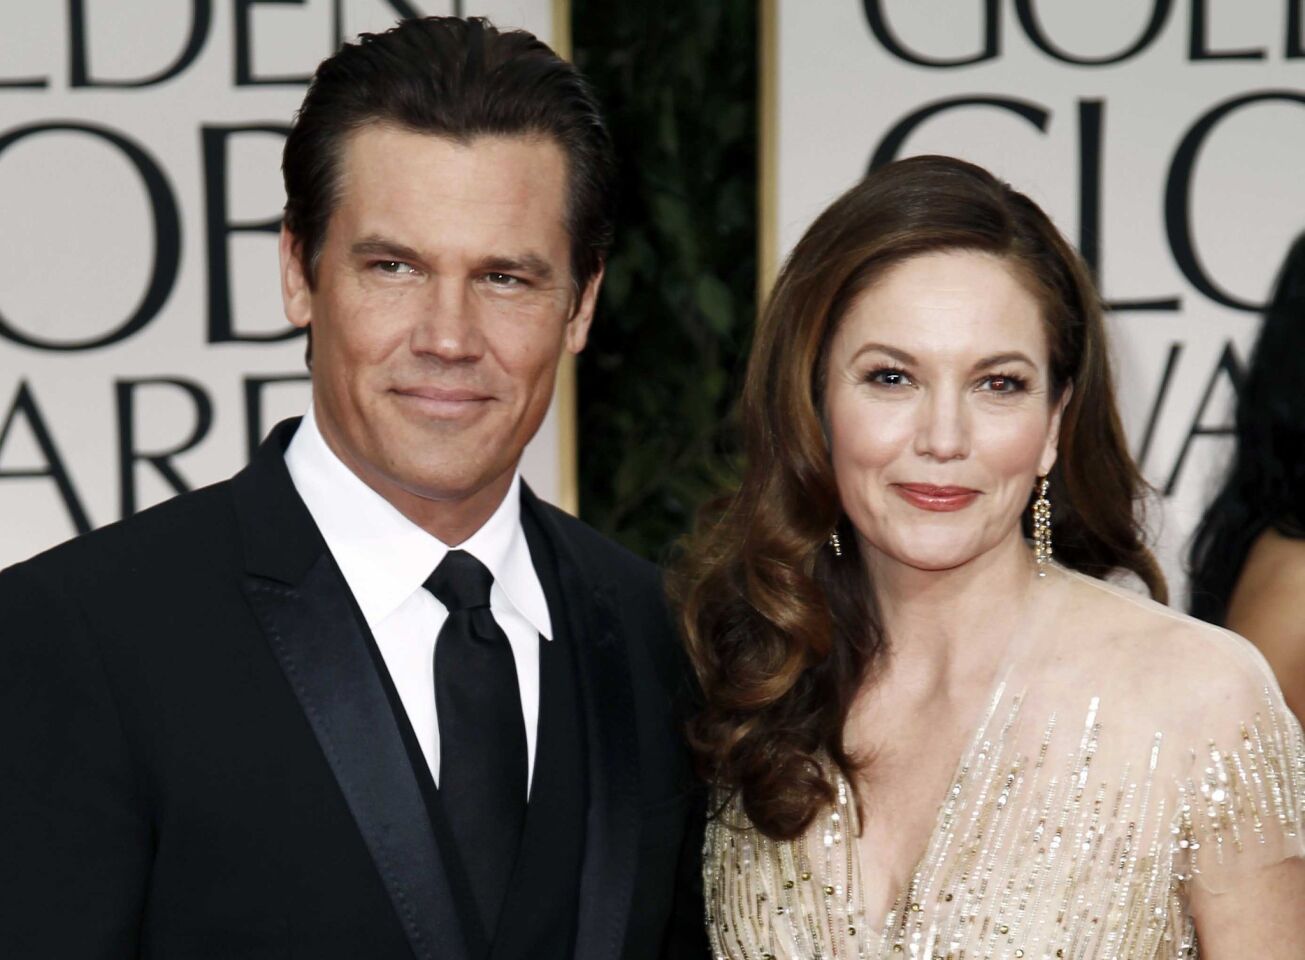 Josh Brolin and Diane Lane have split up after more than eight years of marriage. The actors called it quits in February, with Lane filing papers on the 15th. "Diane Lane and Josh Brolin have decided to end their marriage," their reps first told Us Weekly. The "Gangster Squad" star and "Cinema Verite" actress married in 2004. This is the second divorce for each of them. "It was a mutual decision. It is very amicable. It's not ugly, it's just over," a source said. MORE: Josh Brolin, Diane Lane split up after eight years